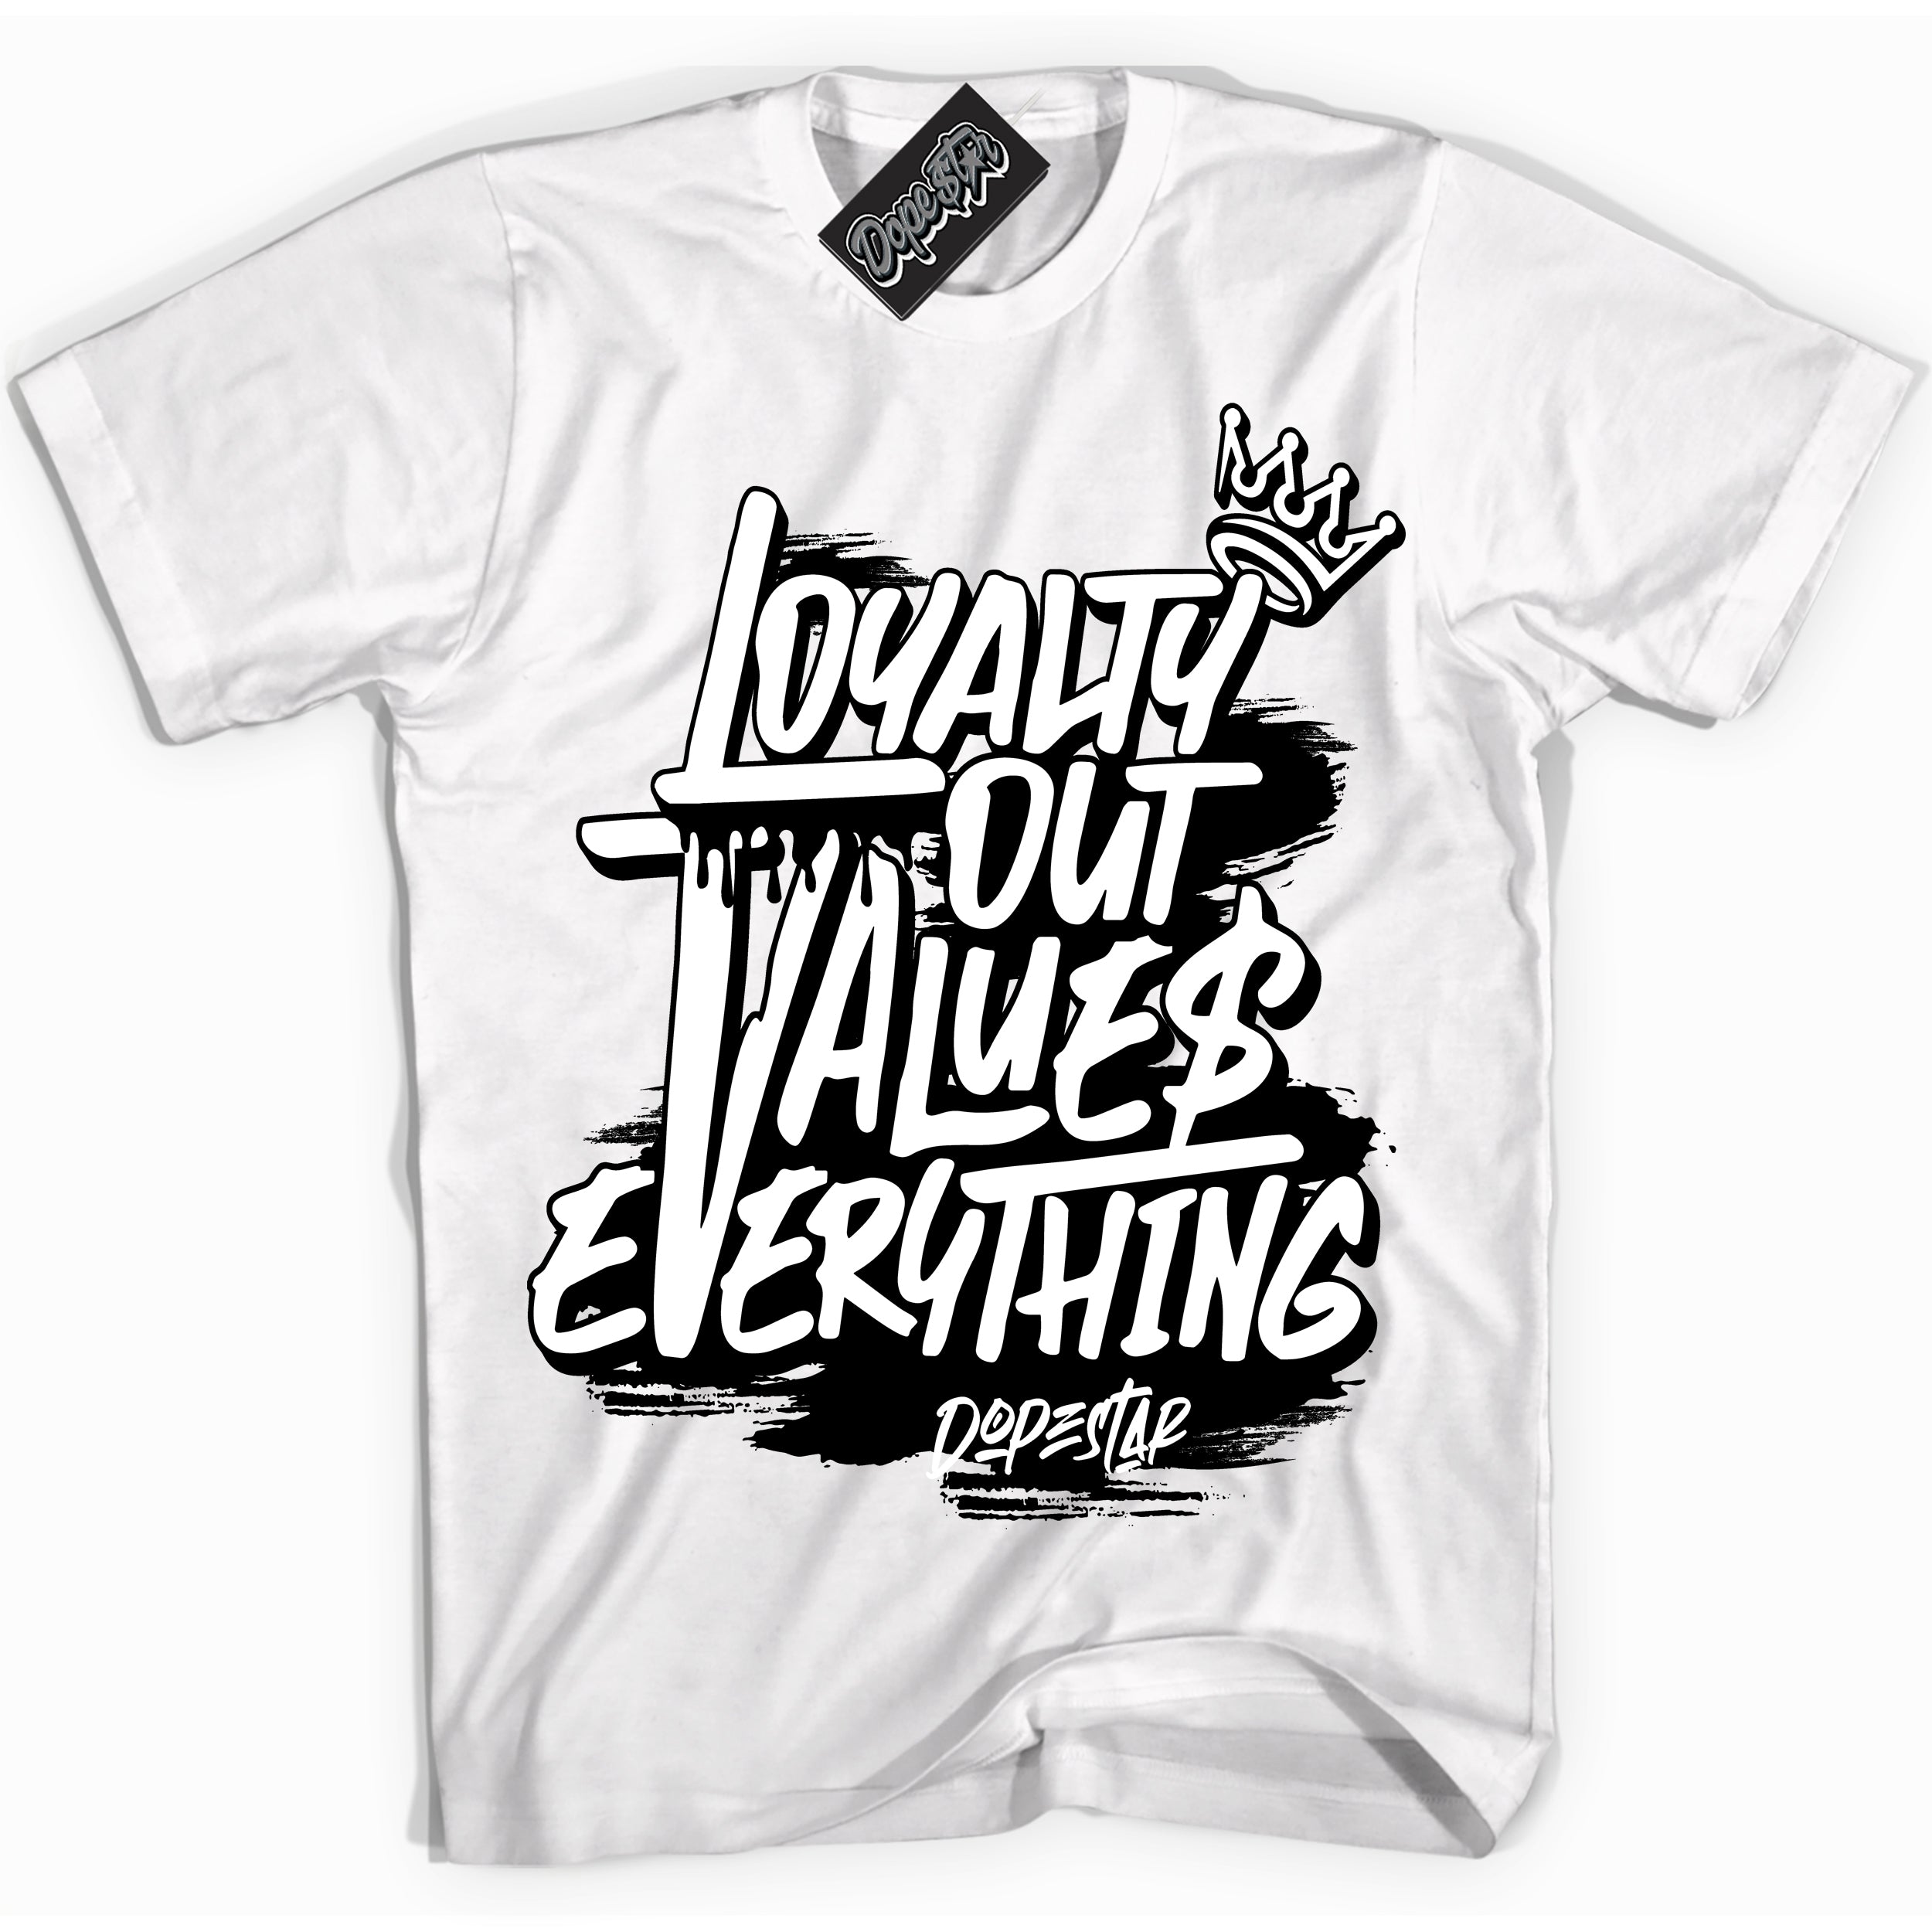 Cool White Shirt with “ Loyalty Out Values Everything” design that perfectly matches Panda Sneakers.